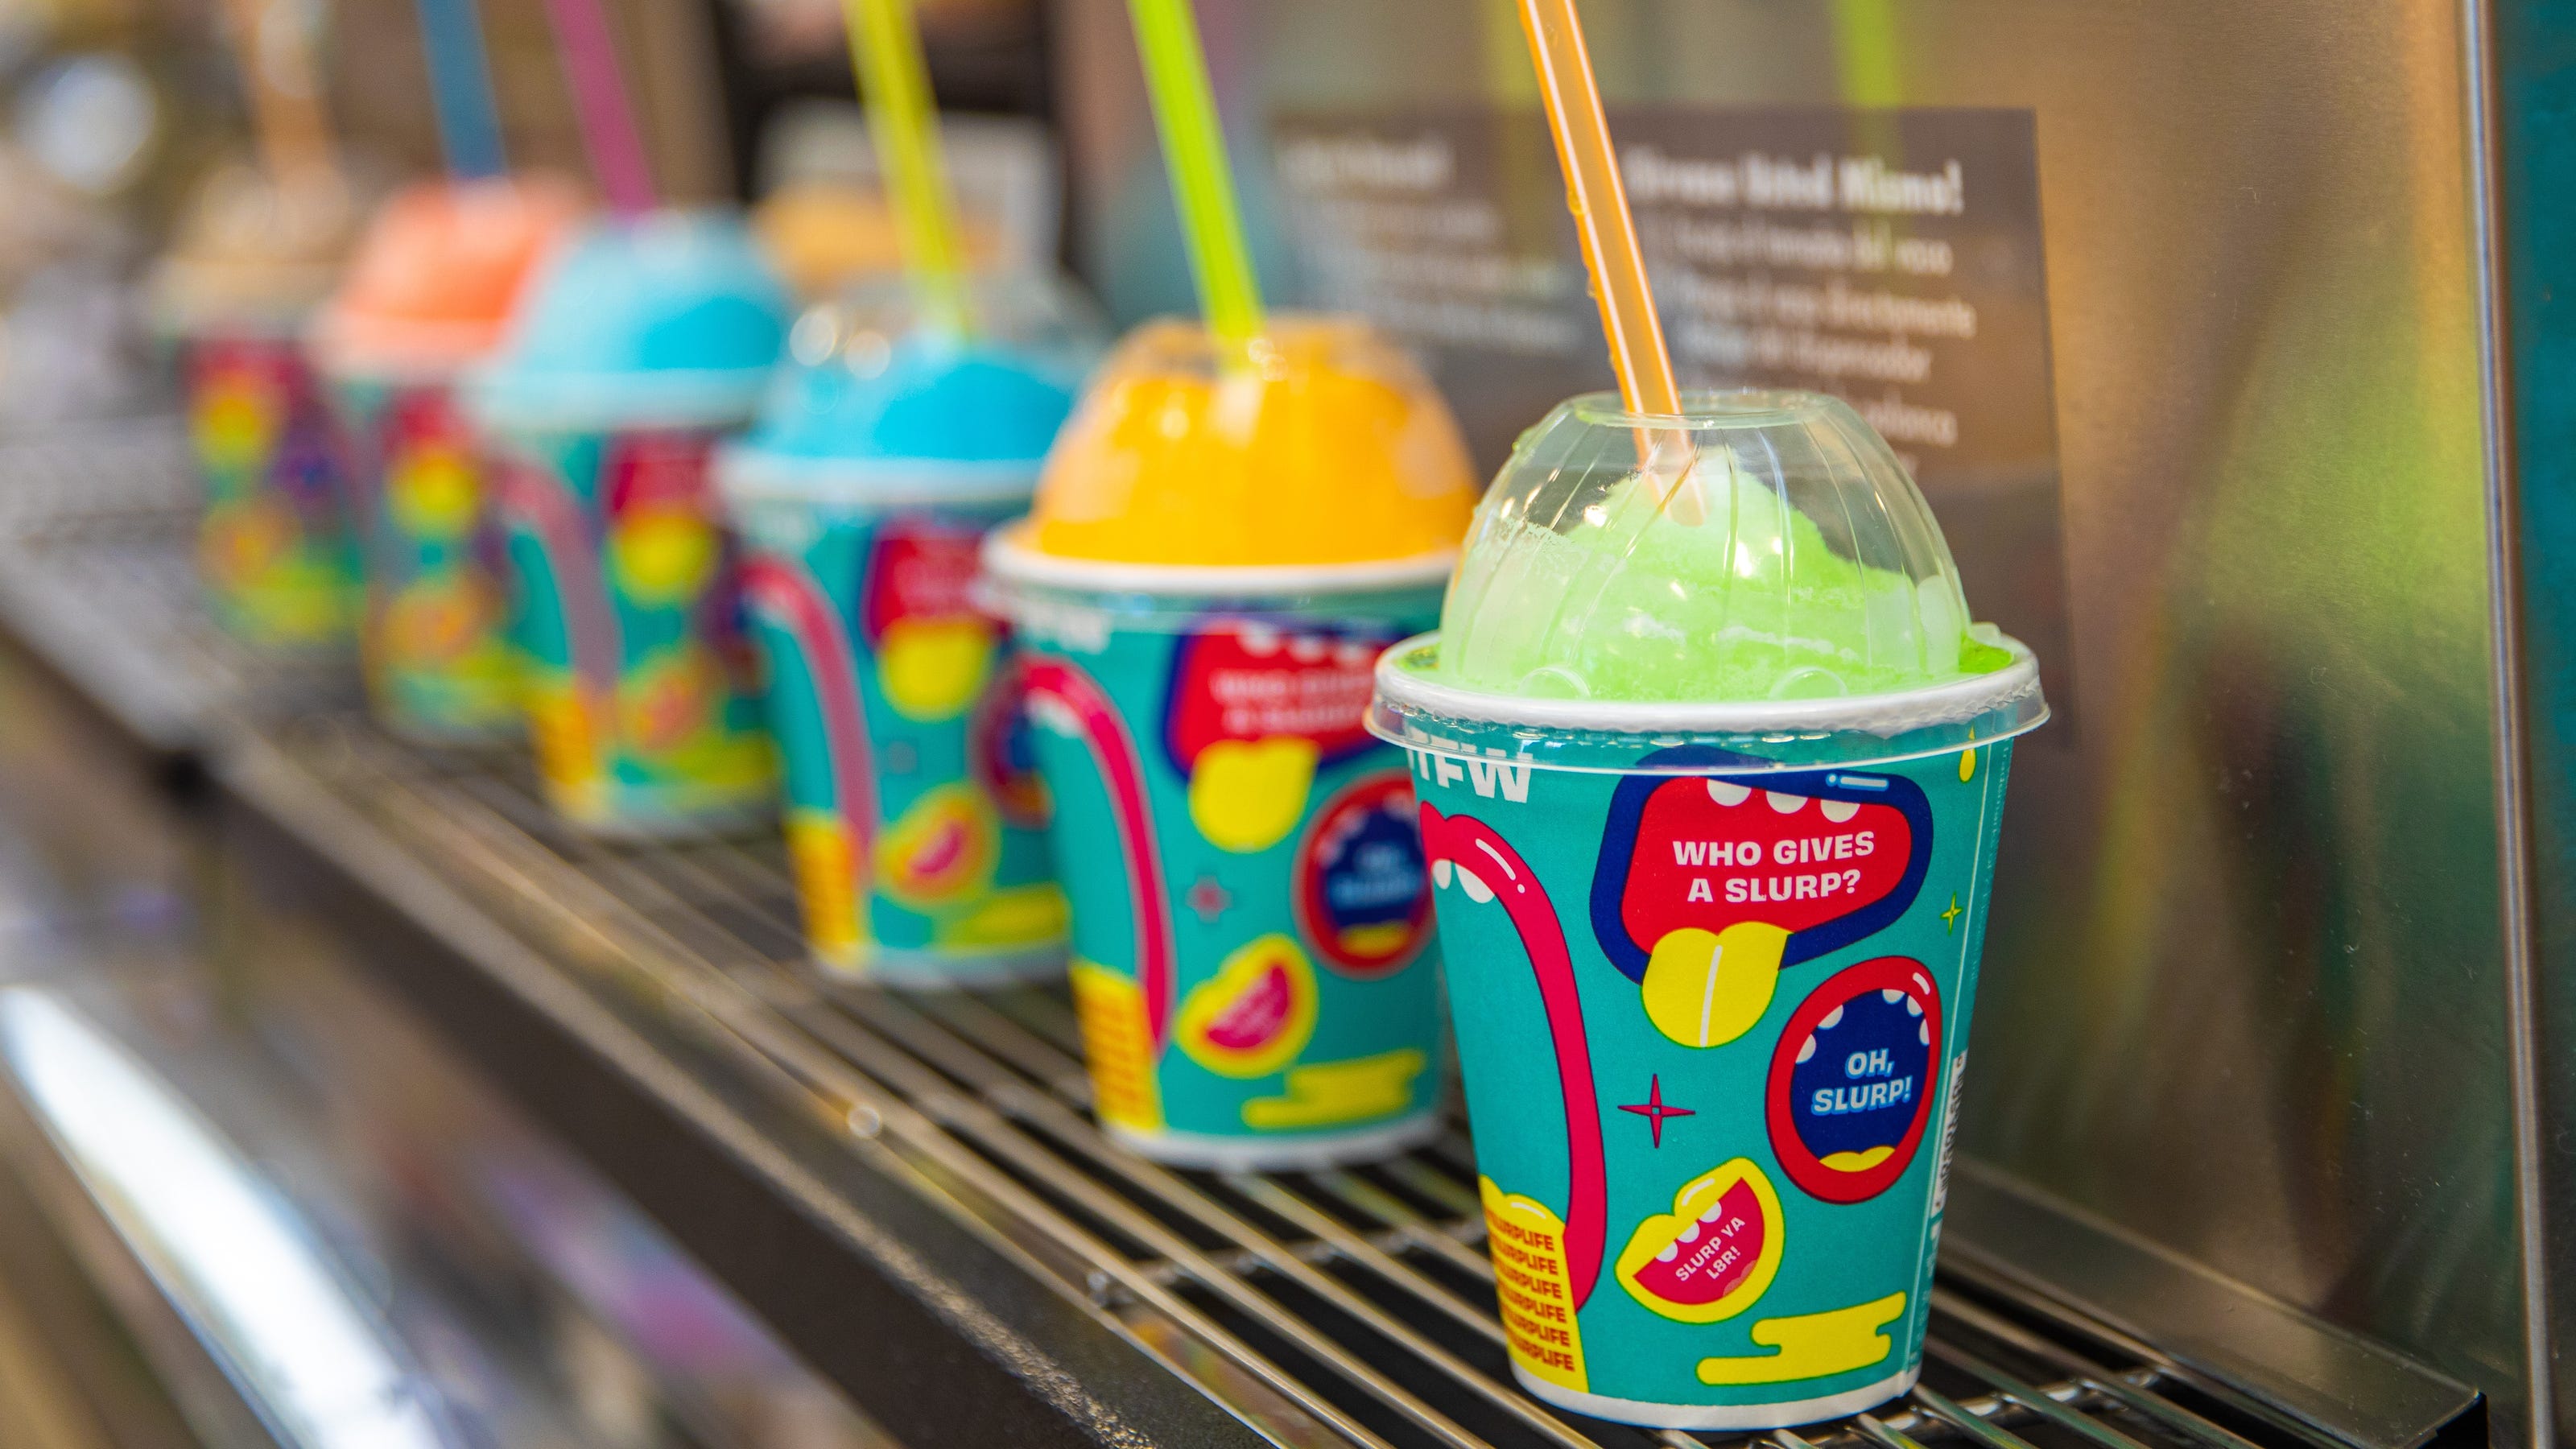 7-Eleven's Free Slurpee Day is canceled due to COVID-19, but here's how to get a free frozen drink